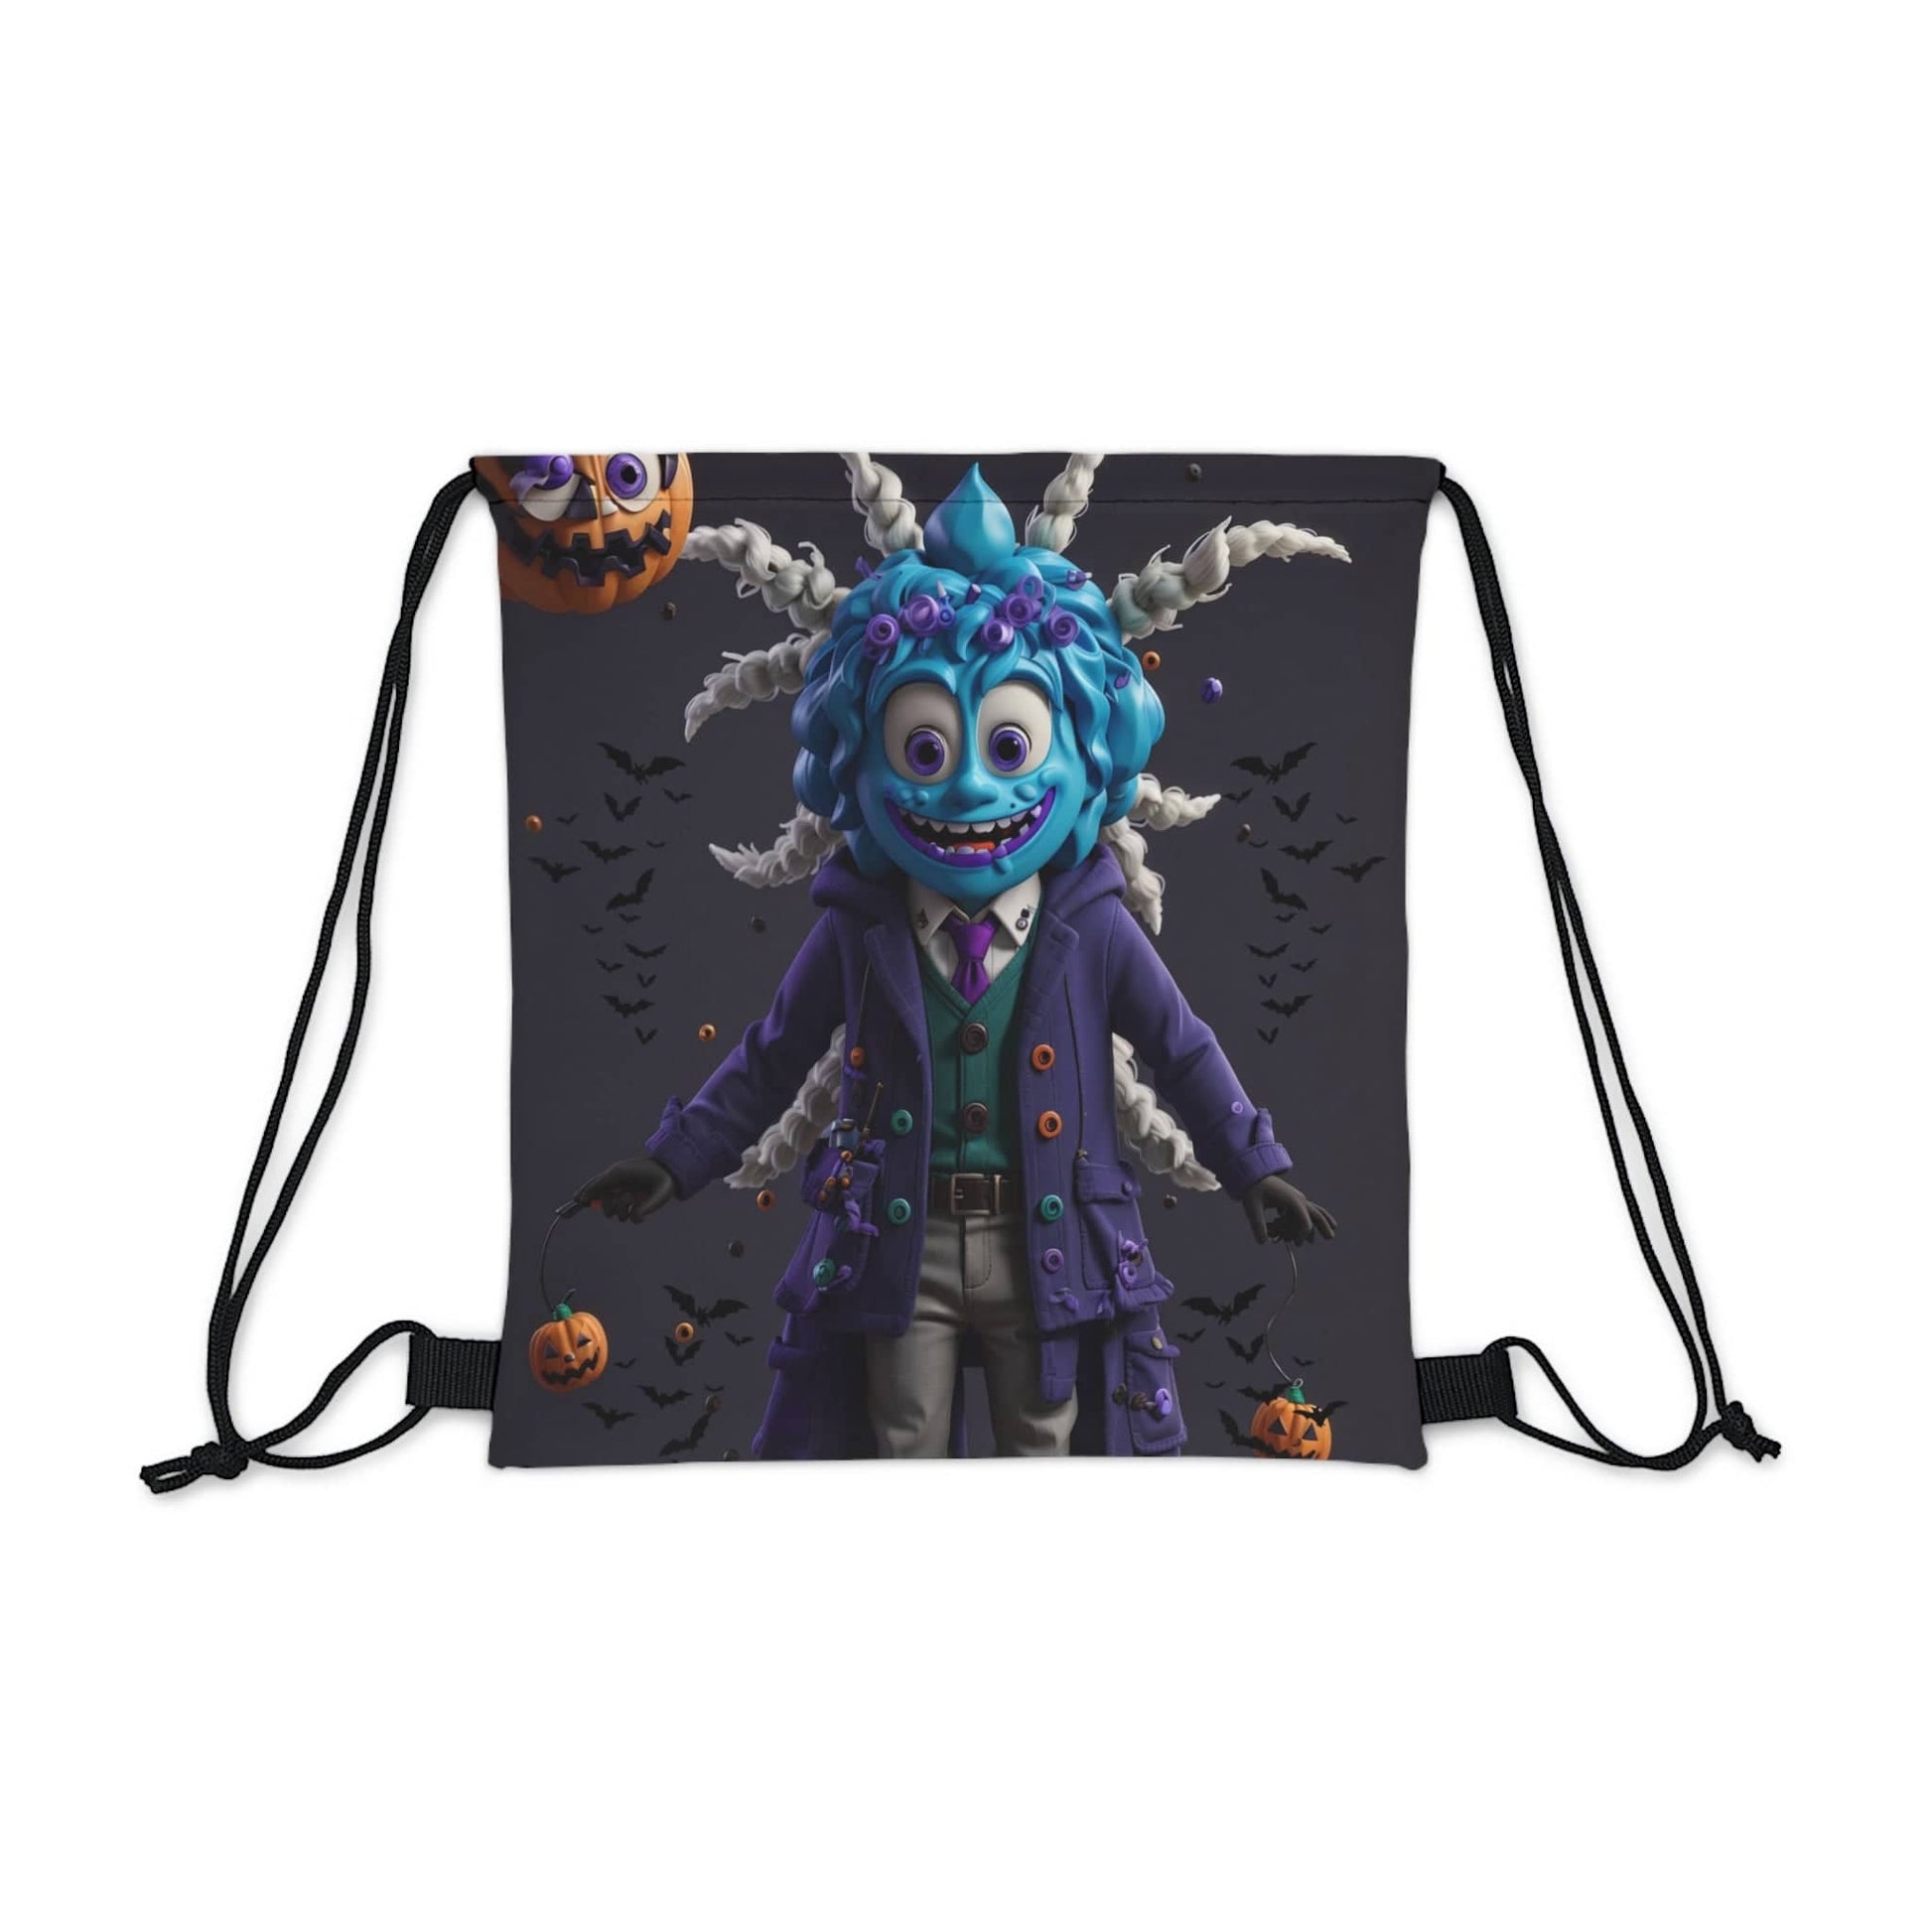 Ghoul's Night Out Drawstring Bag "A Spine-Chilling Companion for Halloween Adventures!" Bags Bigger Than Life   